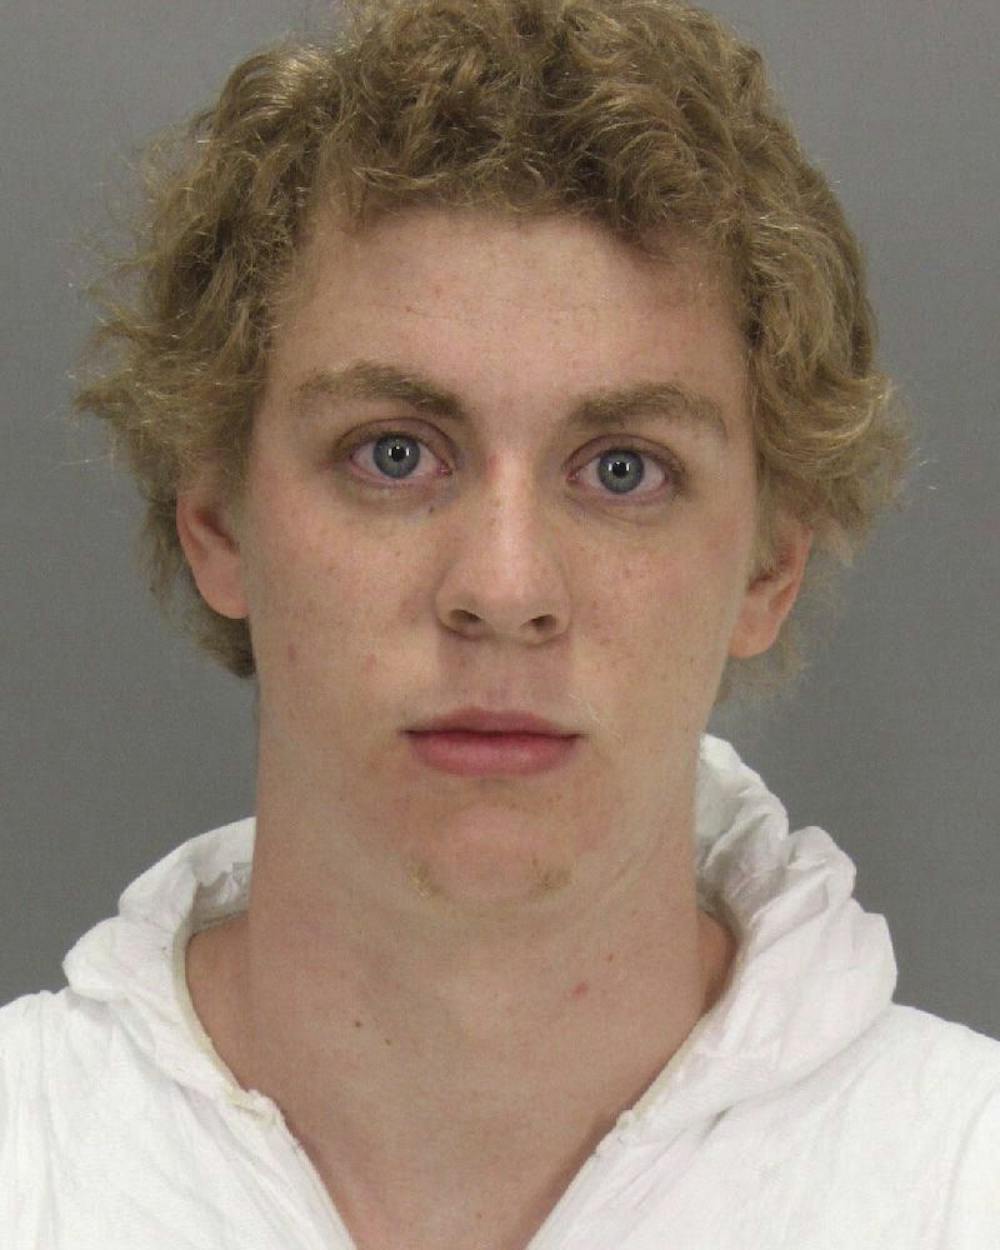 Stanford freshman Brock Turner received a six-month sentence, after being found guilty of three sexual assault charges. // Courtesy of Wikimedia Commons